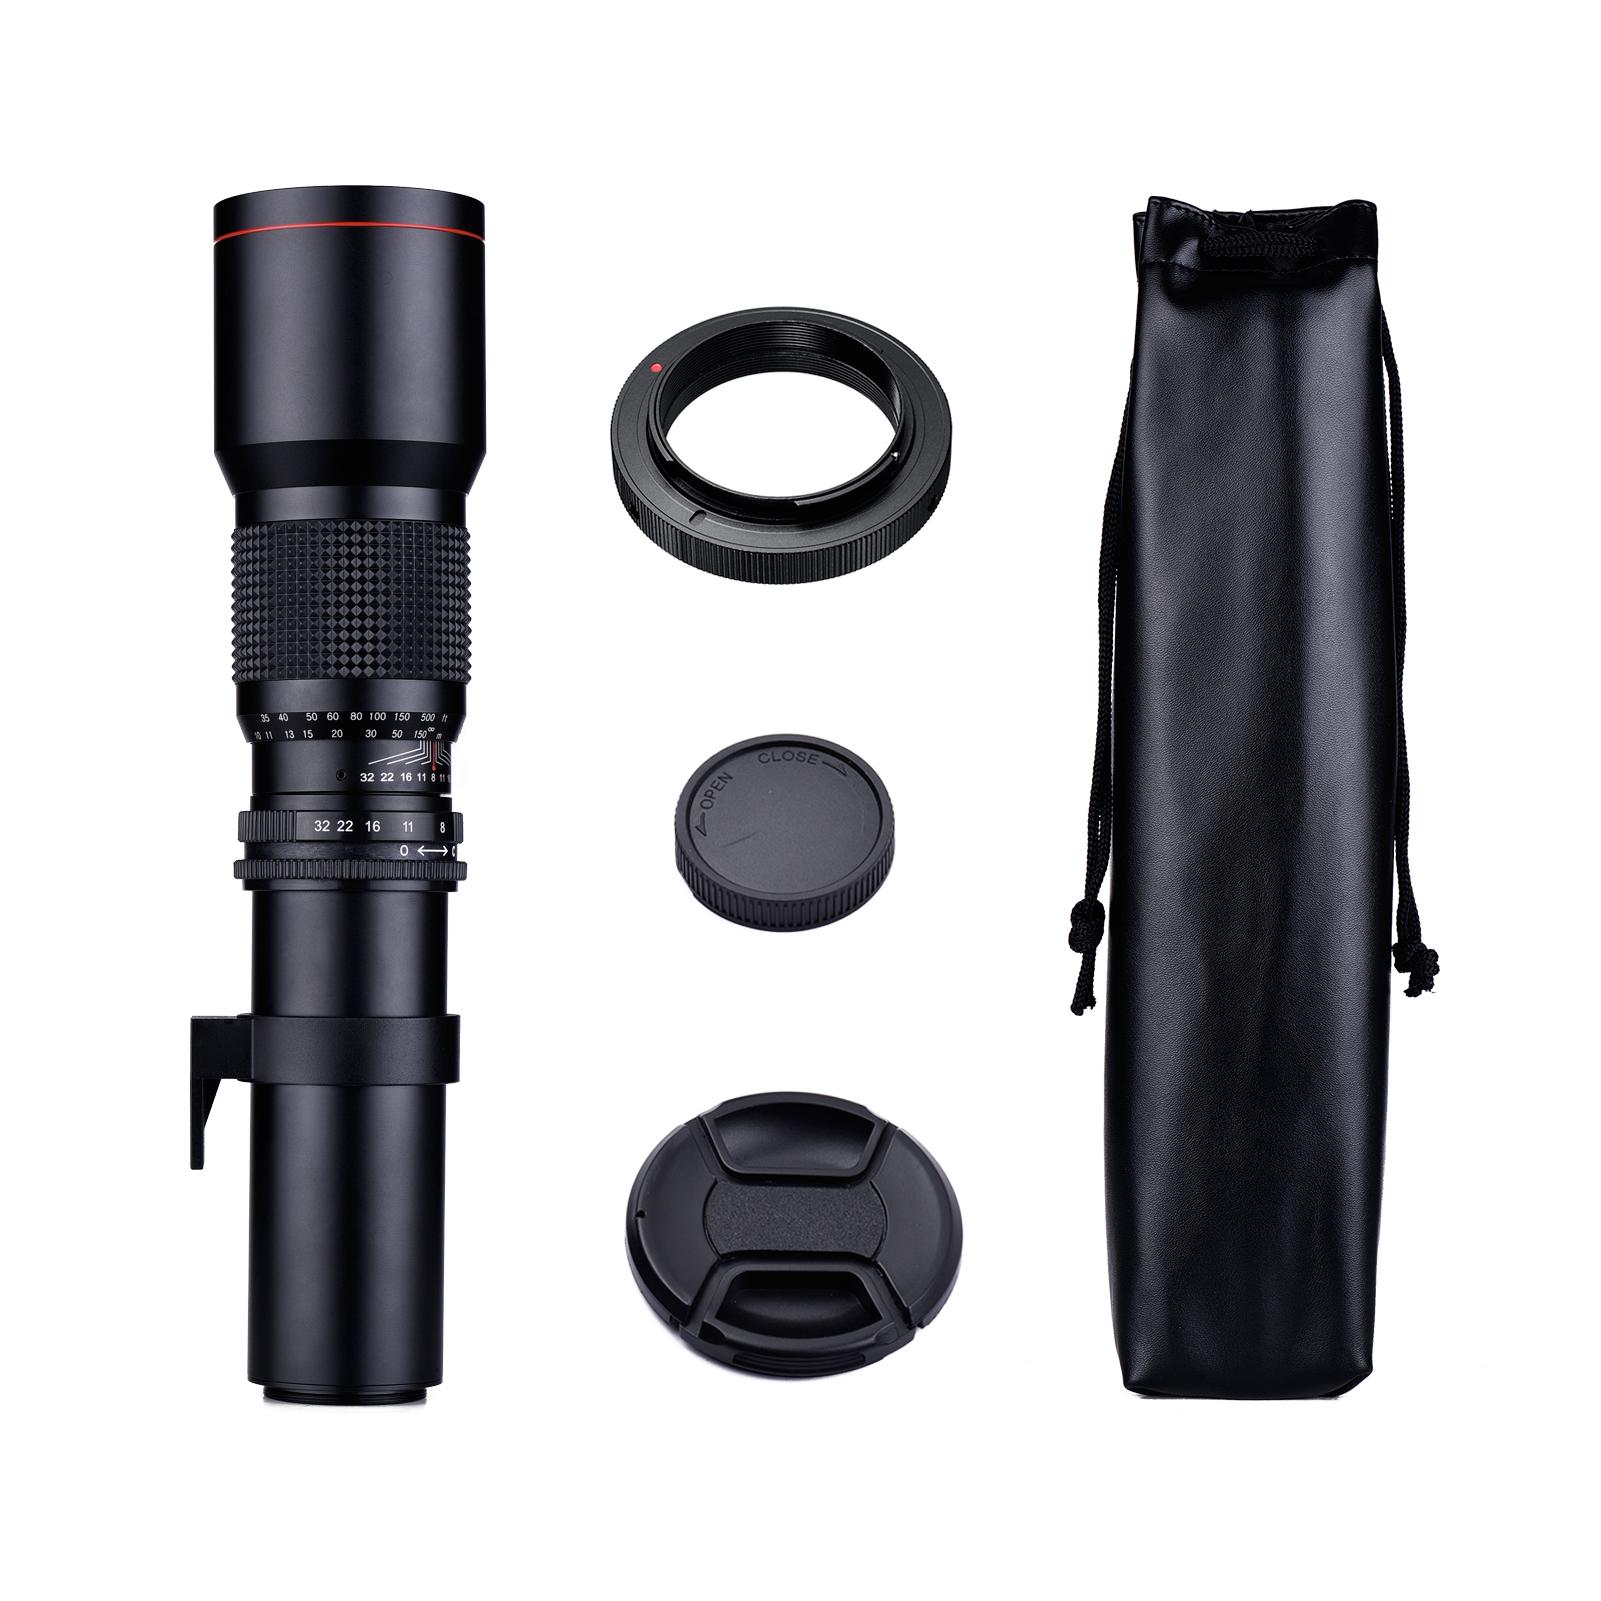 500mm F/8.0-32 Multi Coated Super Telephoto Lens Manual Zoom + T-Mount to F-Mount Adapter Ring Kit Replacement for Nikon